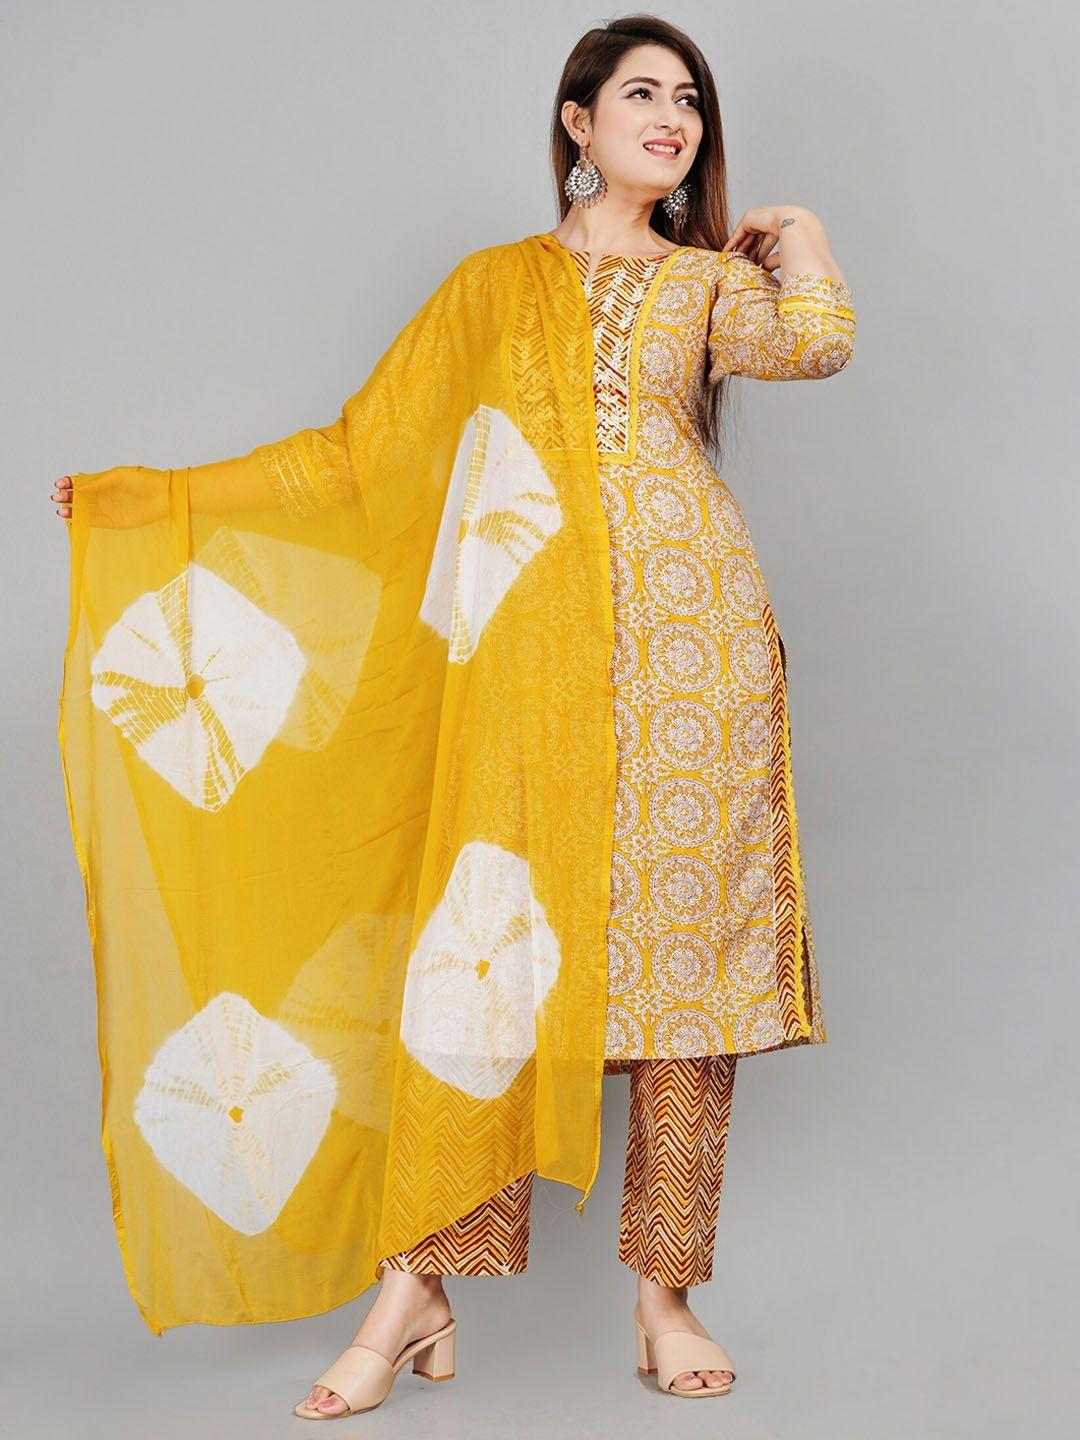 etnicawear women yellow ethnic motifs printed pure cotton kurta with trousers & with dupatta